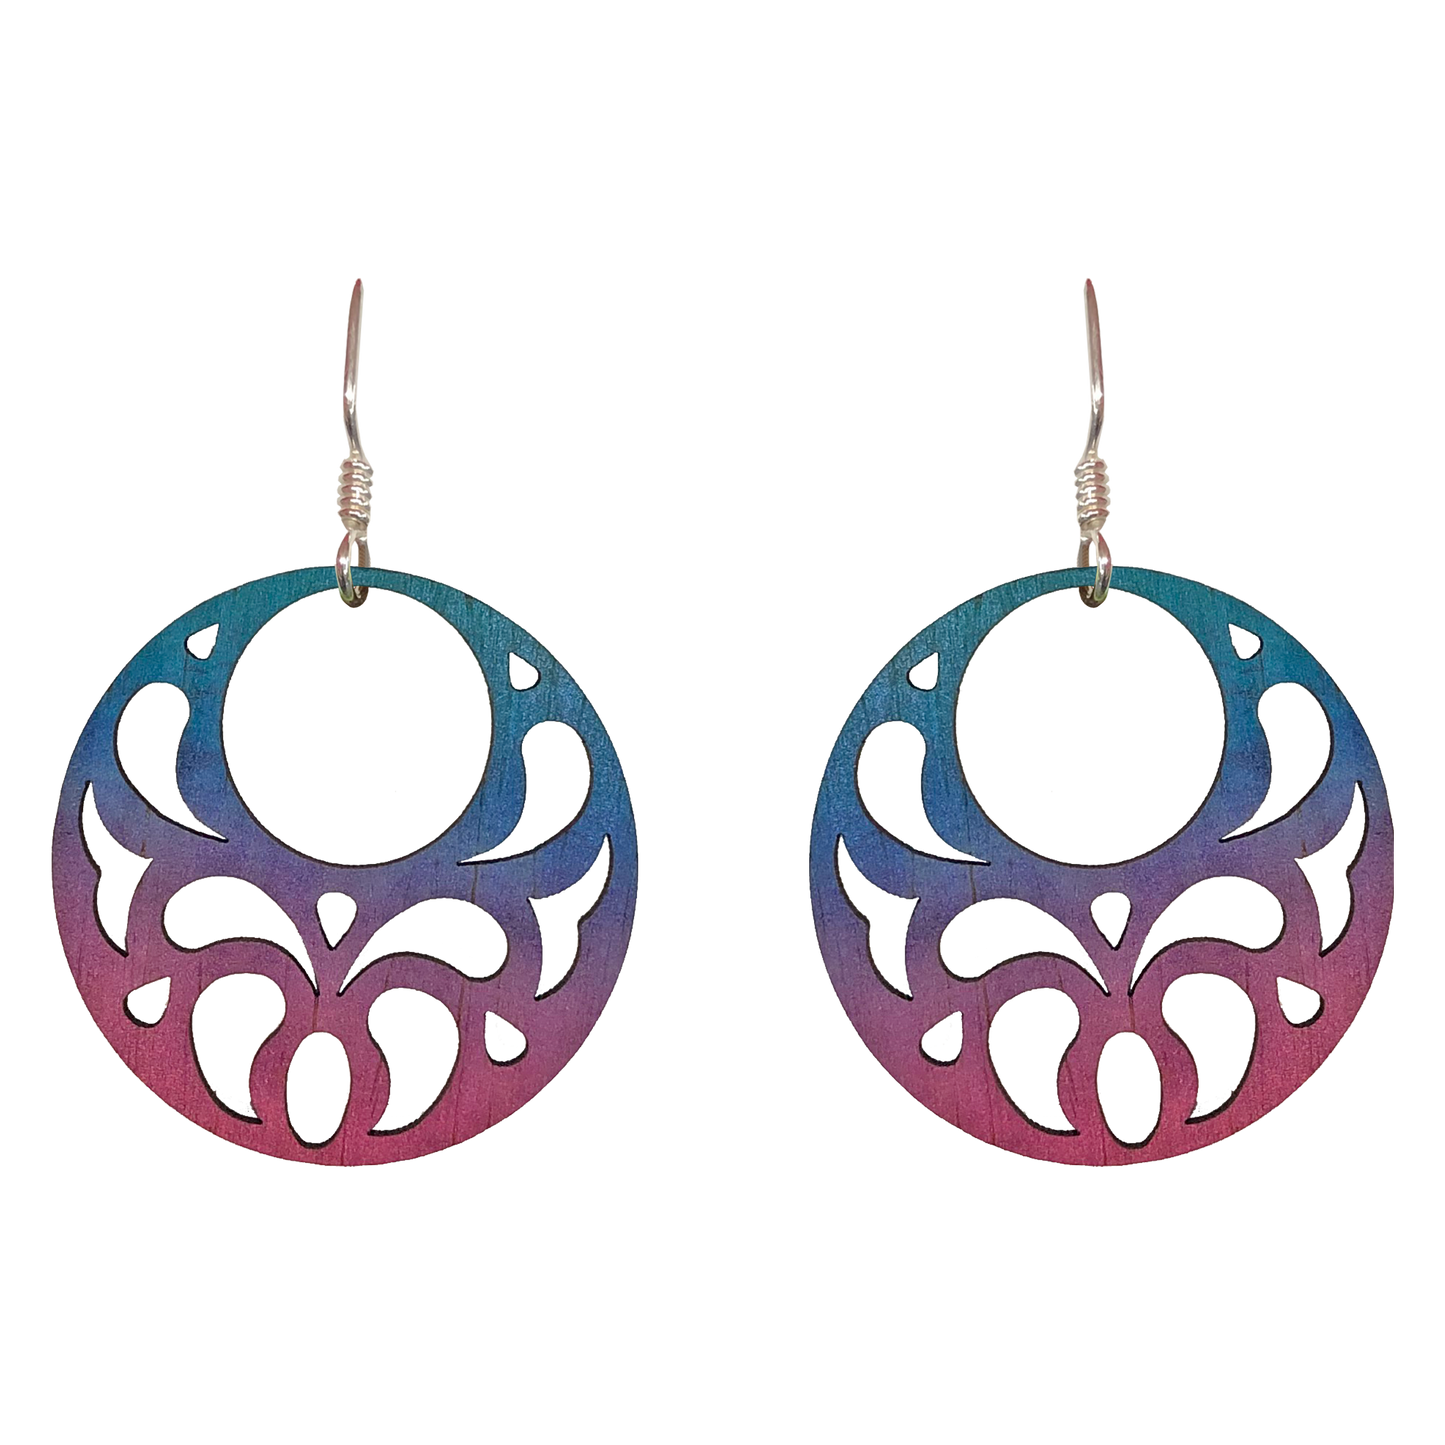 Open Paisley Wood Earrings, Sterling Silver Filled Earwires, Made in the U.S.A.